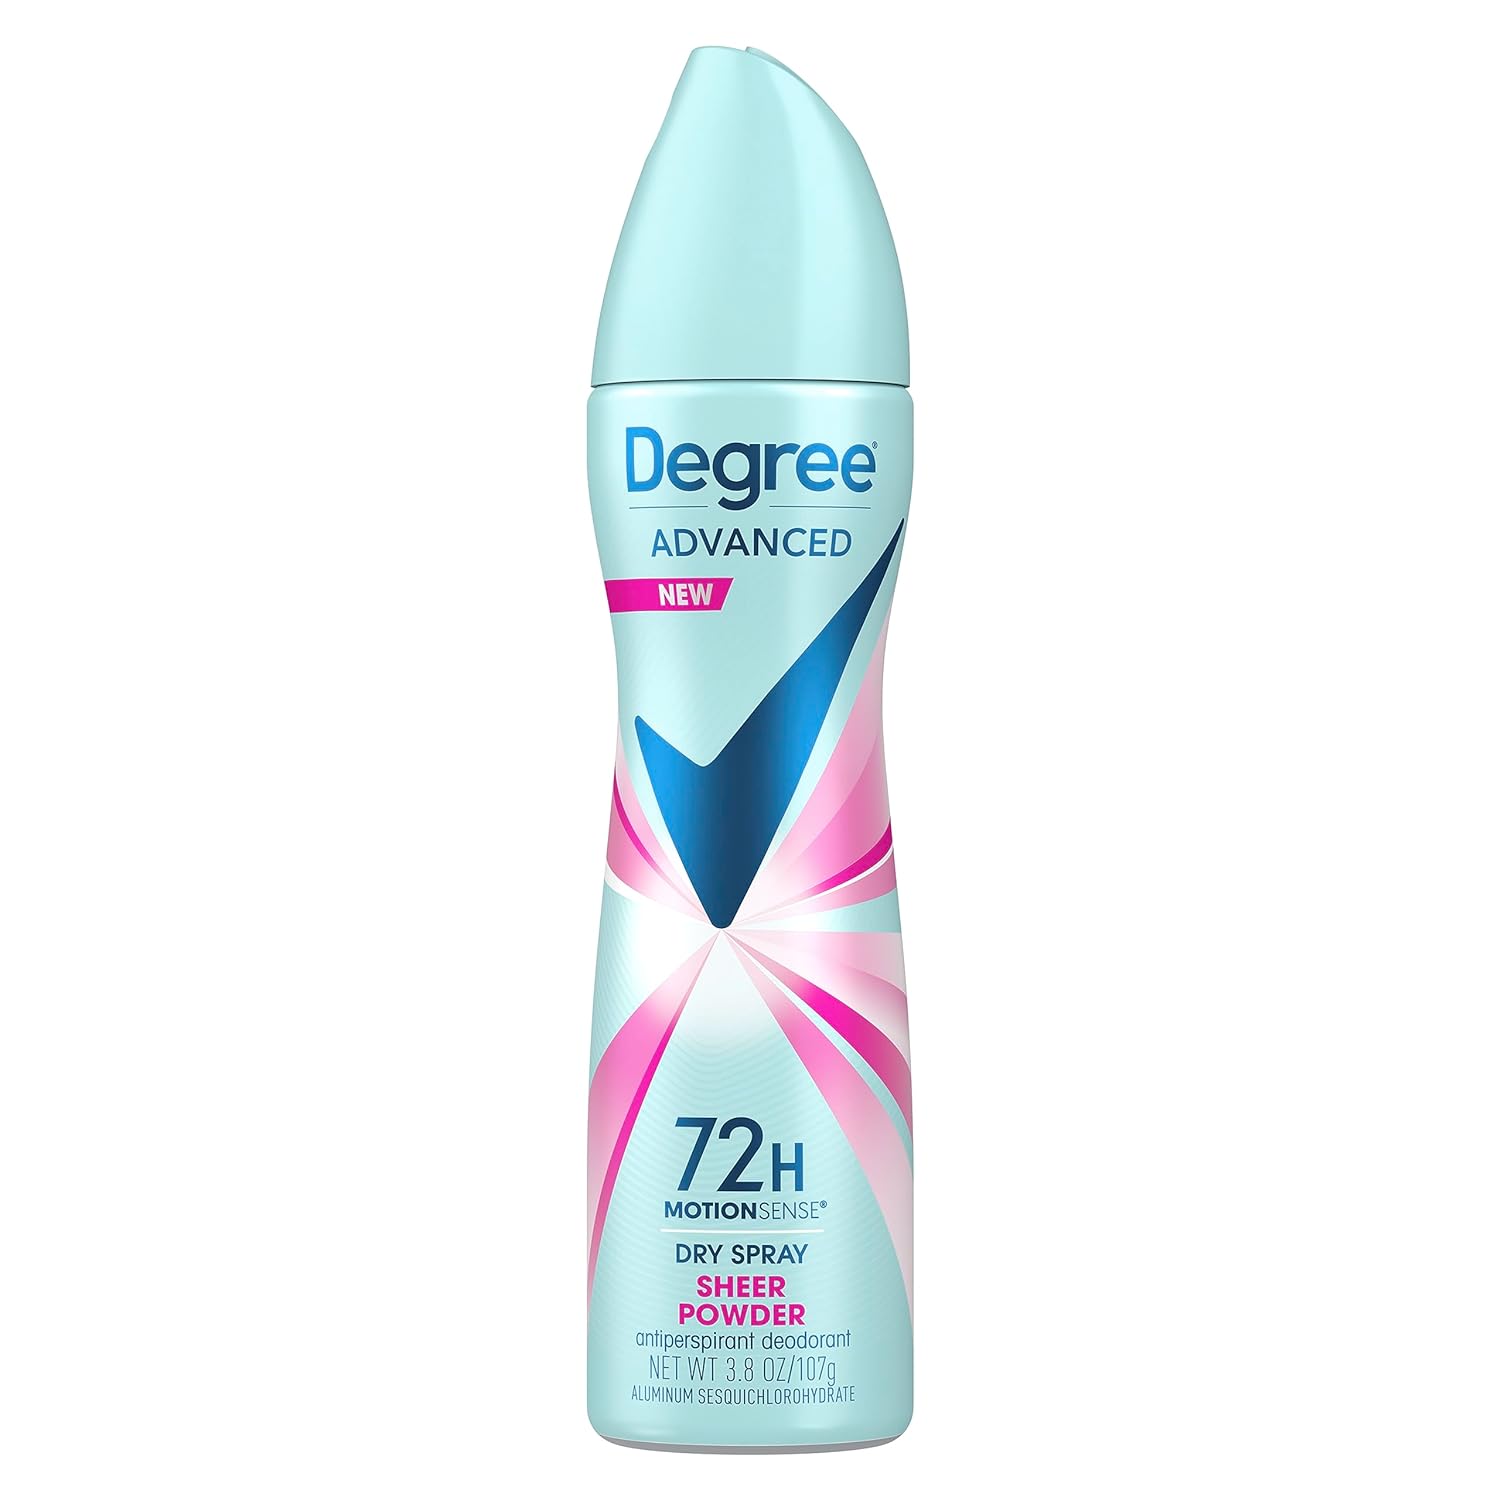 Degree Advanced Antiperspirant Deodorant Dry Spray Sheer Powder 72-Hour Sweat and Odor Protection Deodorant Spray For Women With MotionSense Technology 3.8 oz